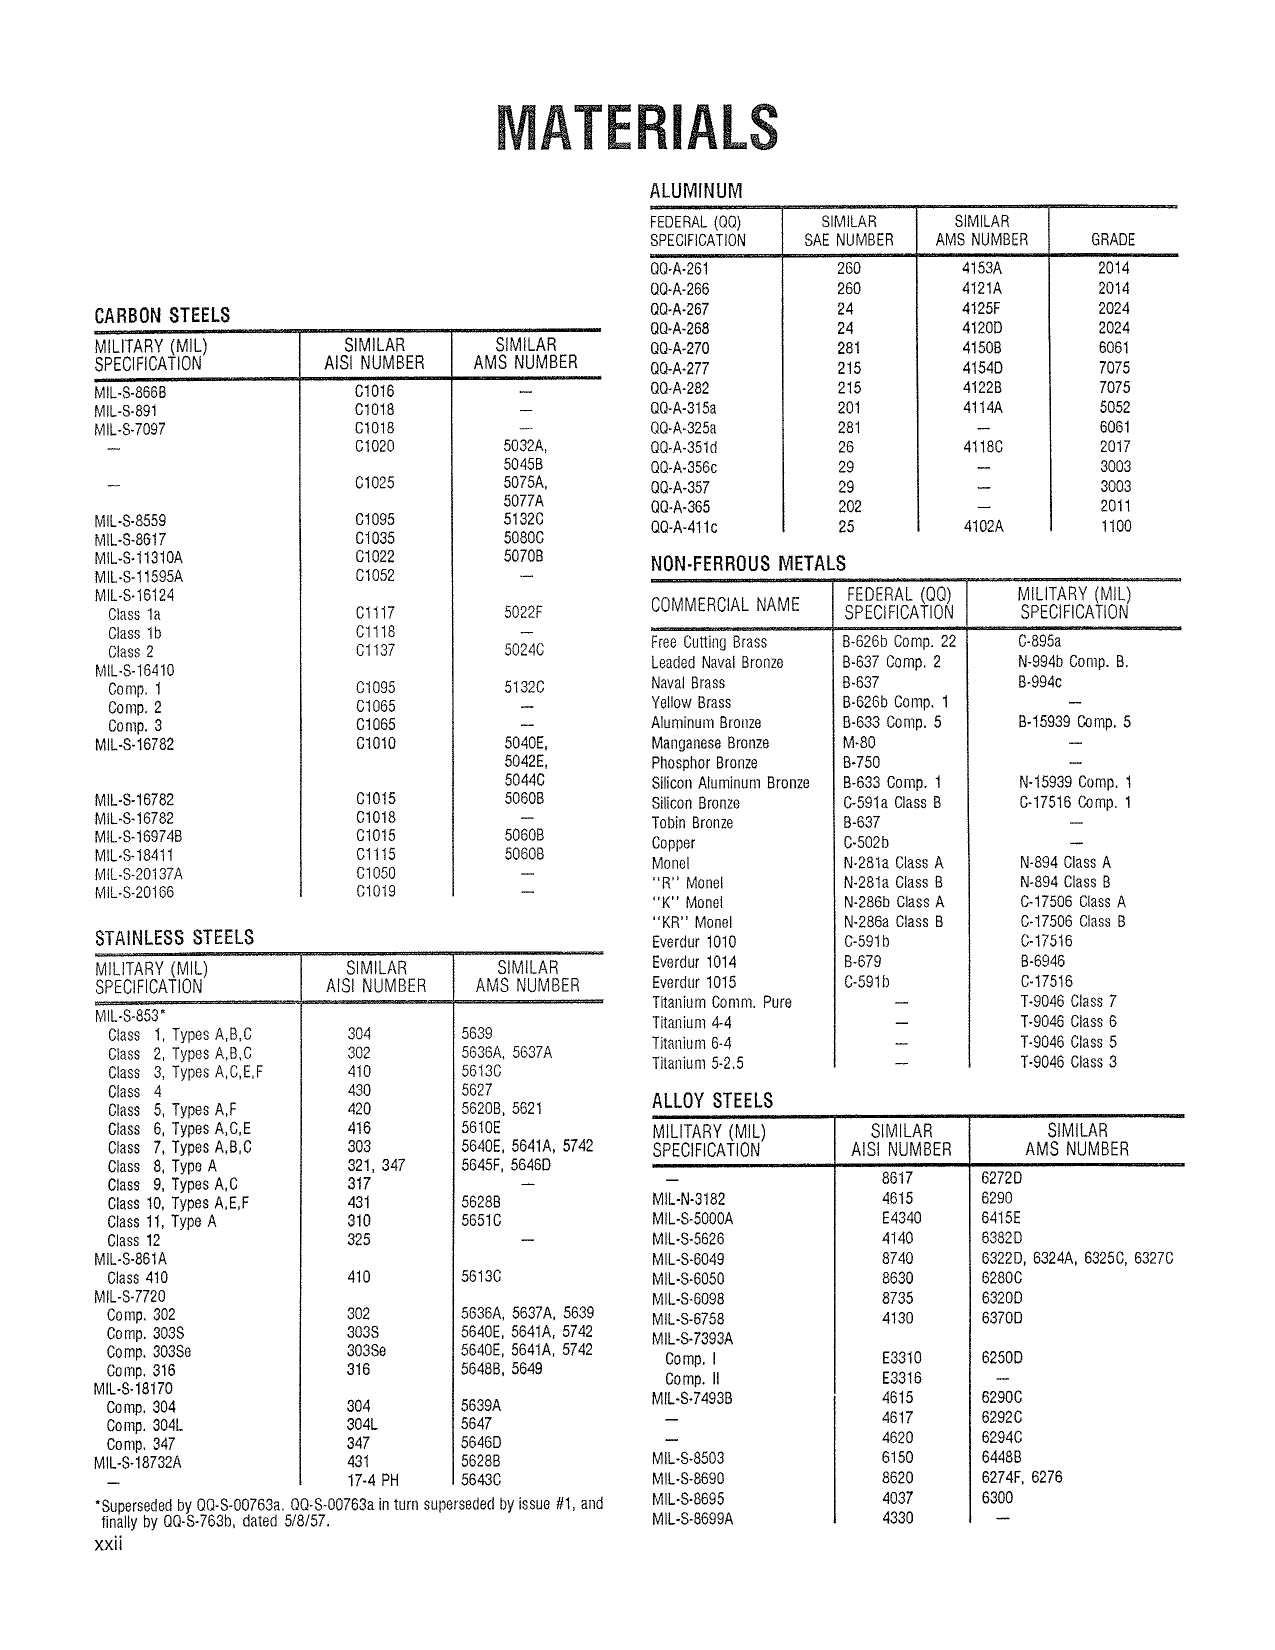 Sample page 1 from AirCorps Library document: Mil-Specs - Materials - Plating - Finishes